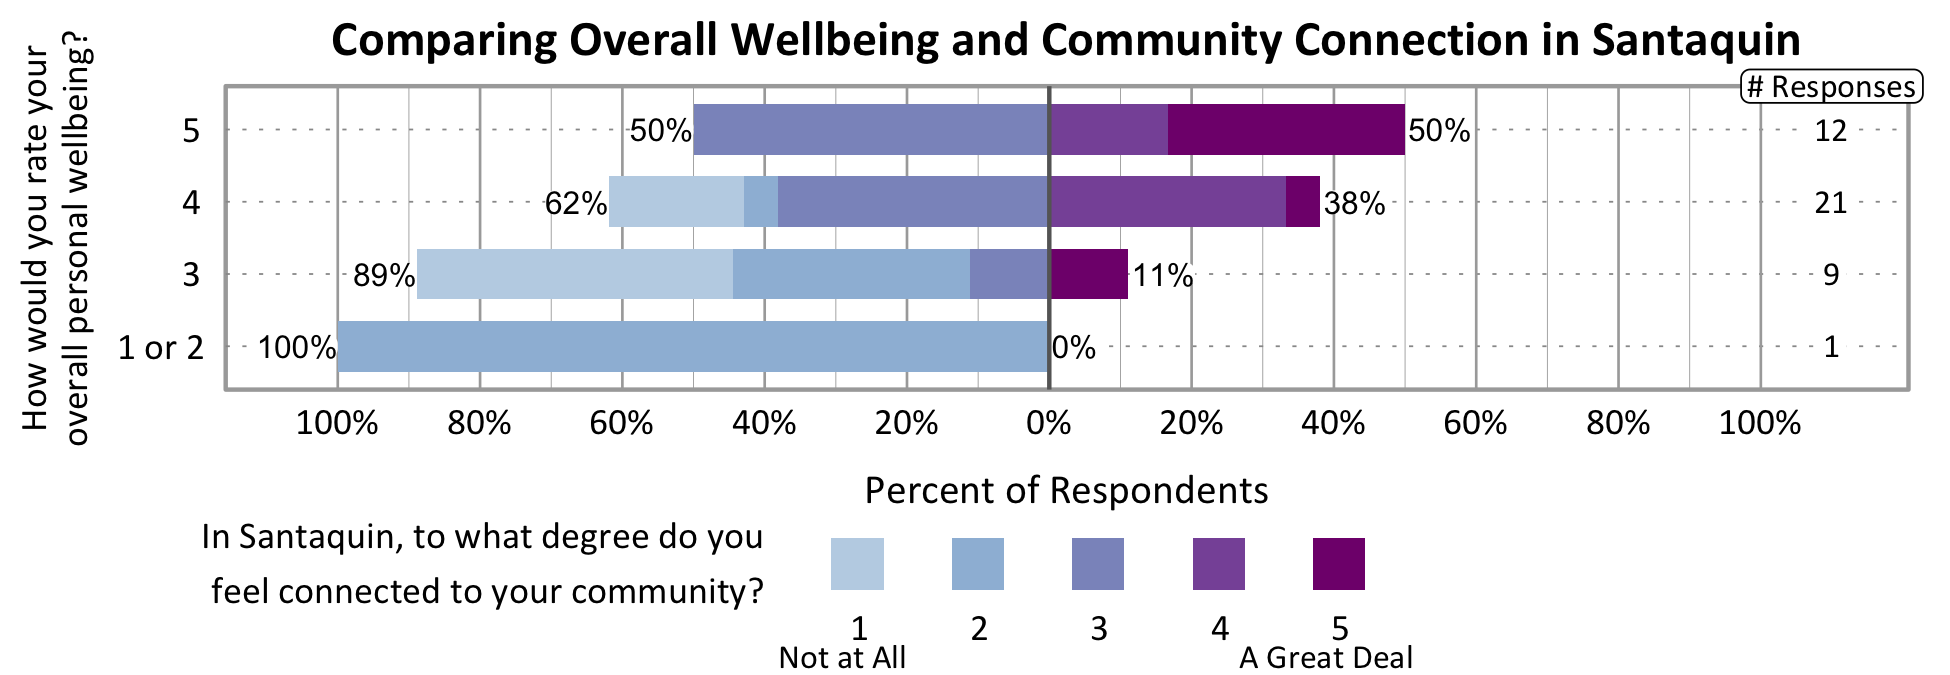 Likert Graph. Title: Comparing Overall Wellbeing and Community Connection in Santaquin. Of the 1 respondents that rate their overall personal wellbeing as a 1 or 2, 100% indicate a community connection score of 1, 2, or 3 while 0% indicate a community connection score of 4 or 5. Of the 9 respondents that rate their overall personal wellbeing as a 3, 89% indicate a community connection score of 1, 2, or 3 while 11% indicate a community connection score of 4 or 5. Of the 21 respondents that rate their overall personal wellbeing as a 4, 62% indicate a community connection score of 1, 2, or 3 while 38% indicate a community connection score of 4 or 5. Of the 12 participants that rate their overall wellbeing as a 5, 50% indicate a community connection score of 1, 2, or 3 while 50% indicate a community connection score of 4 or 5.